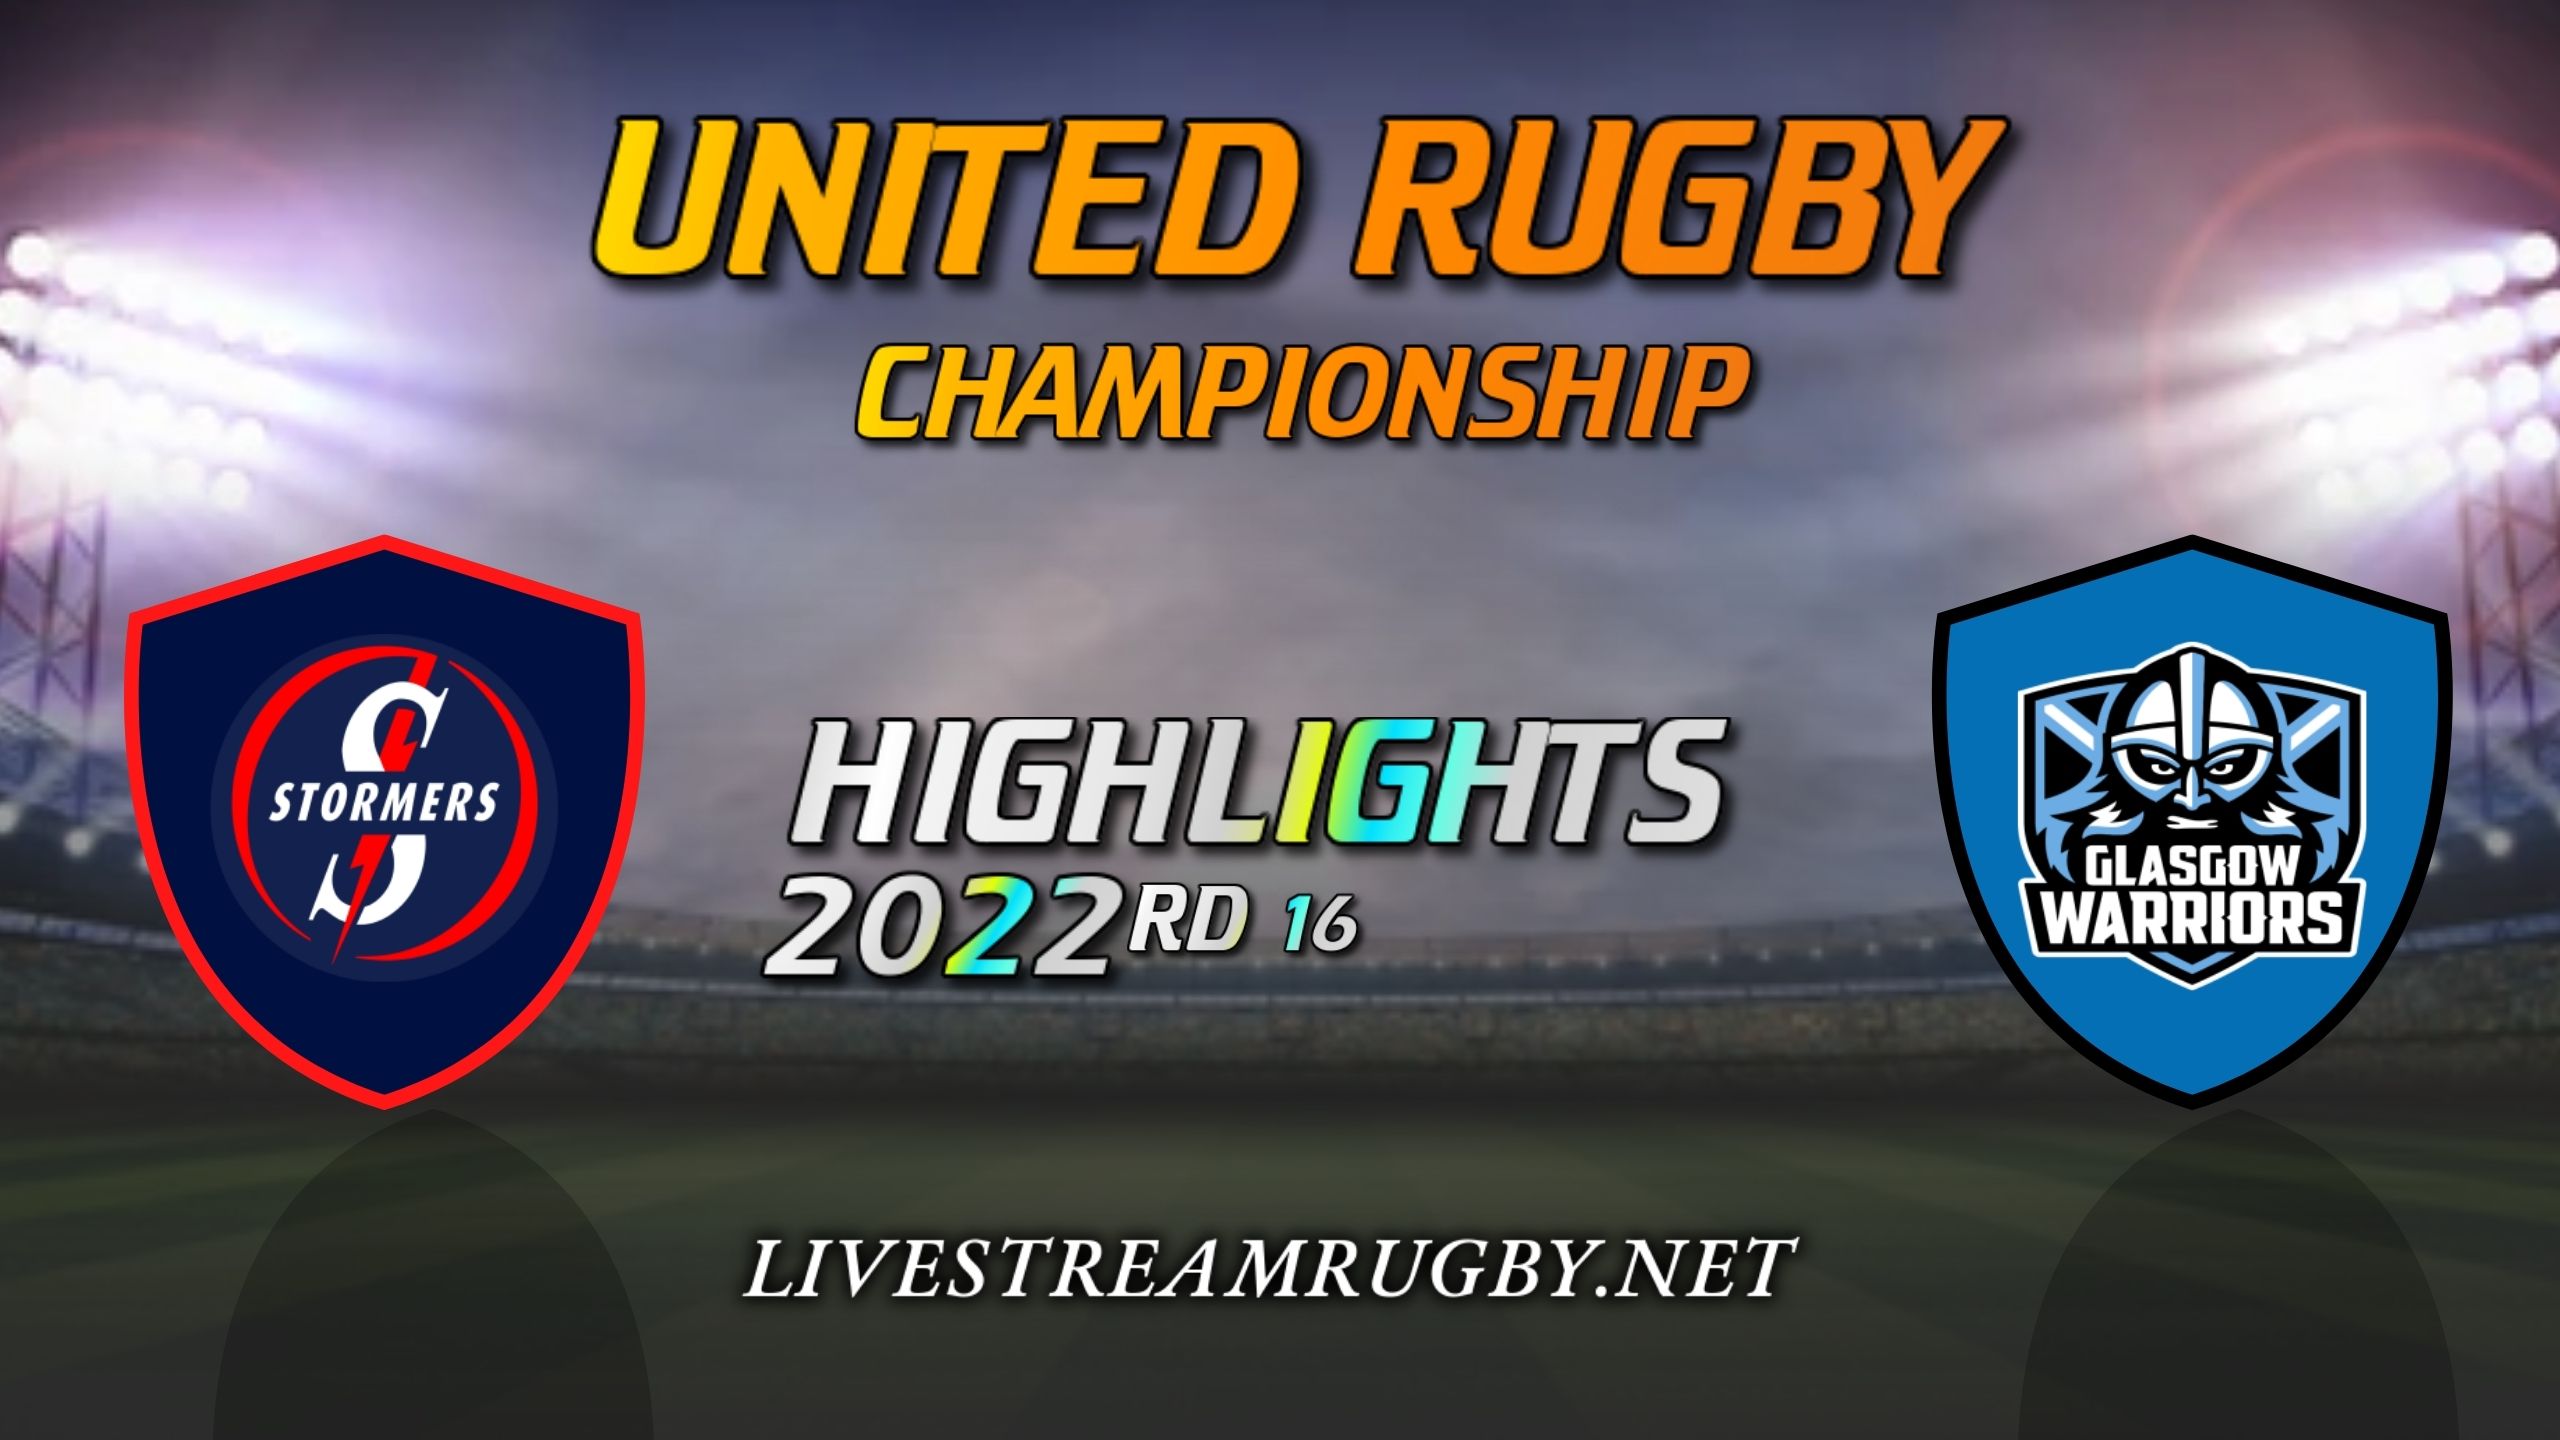 Stormers Vs Glasgow Warriors Highlights 2022 Rd 16 United Rugby